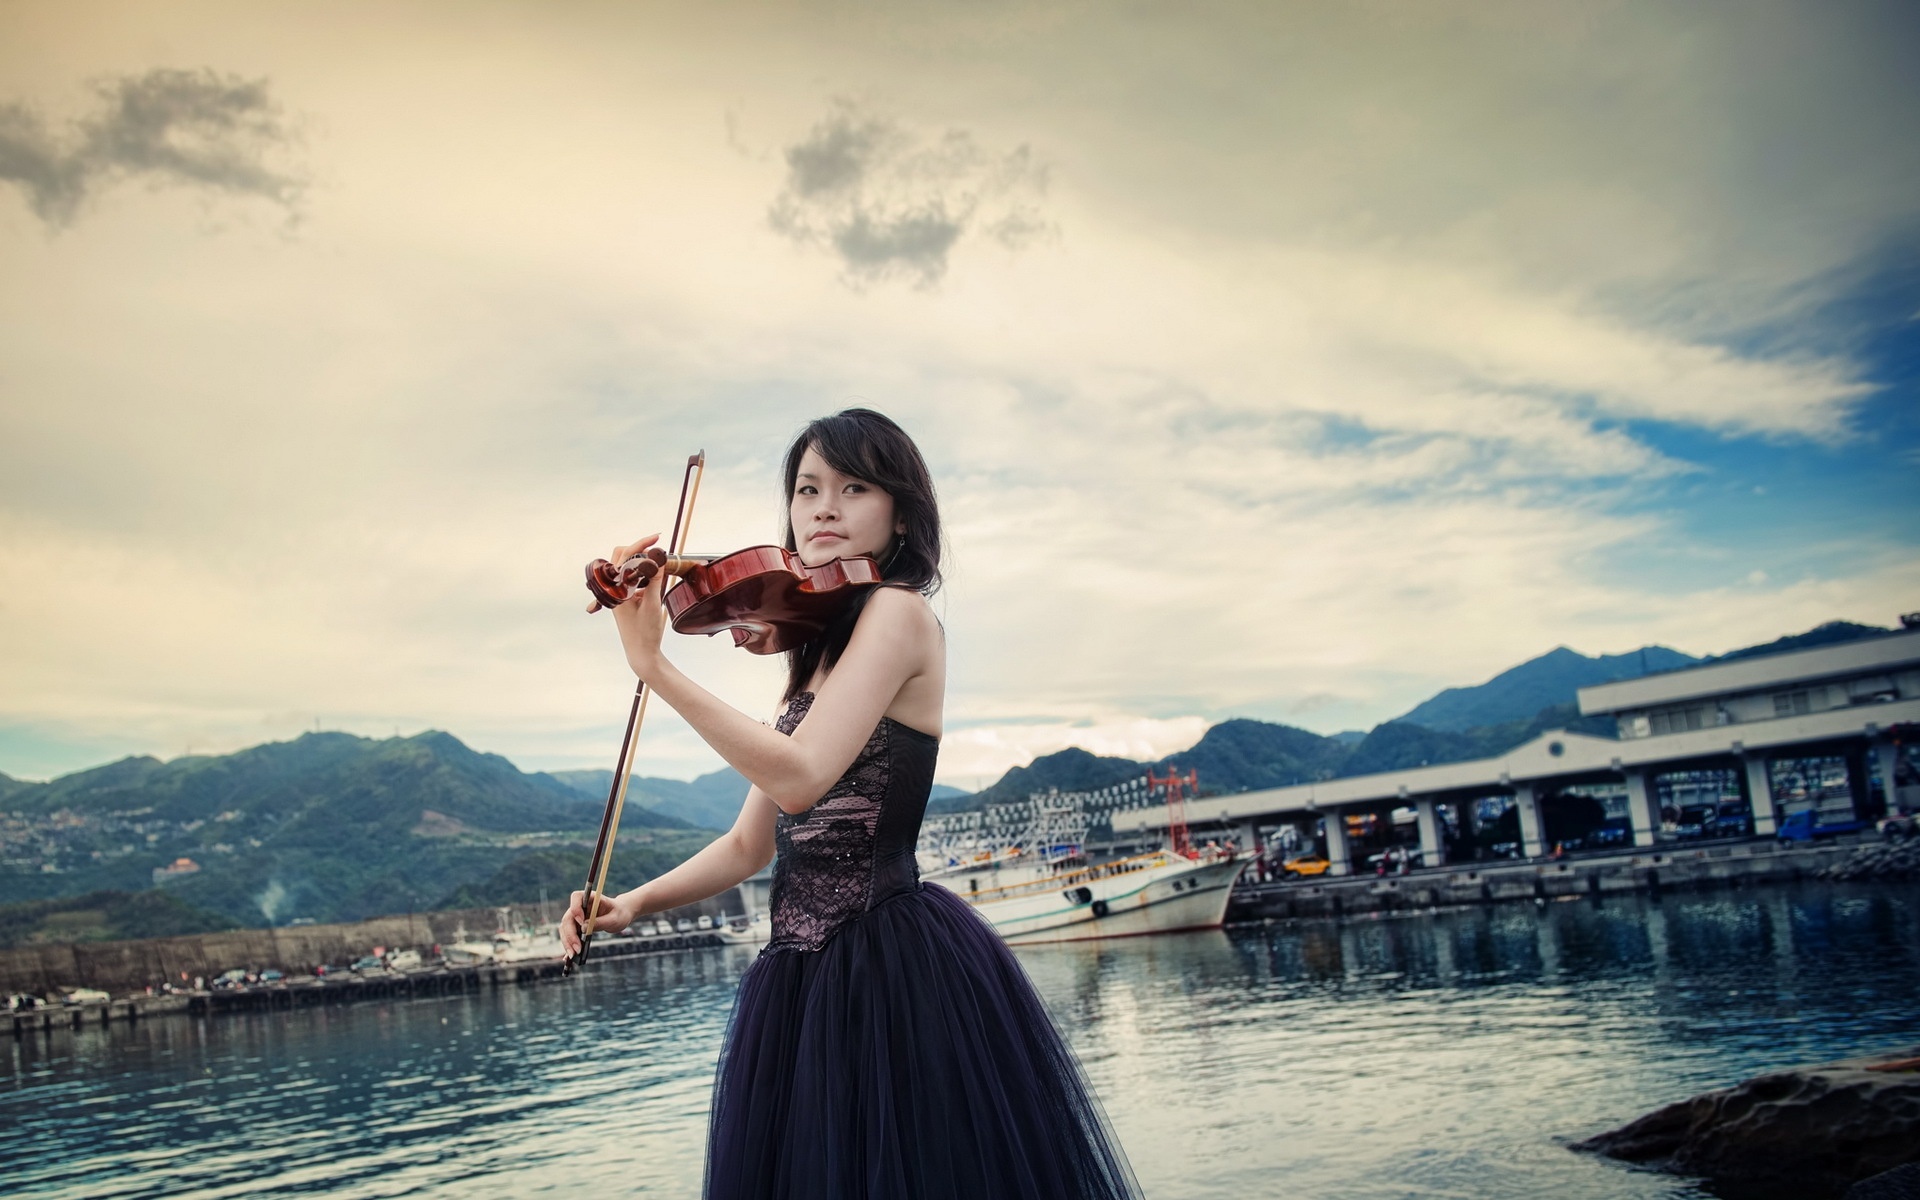 Violin: Bowing Techniques, Outdoor Acoustics, Bow Grip, Classic Music. 1920x1200 HD Wallpaper.